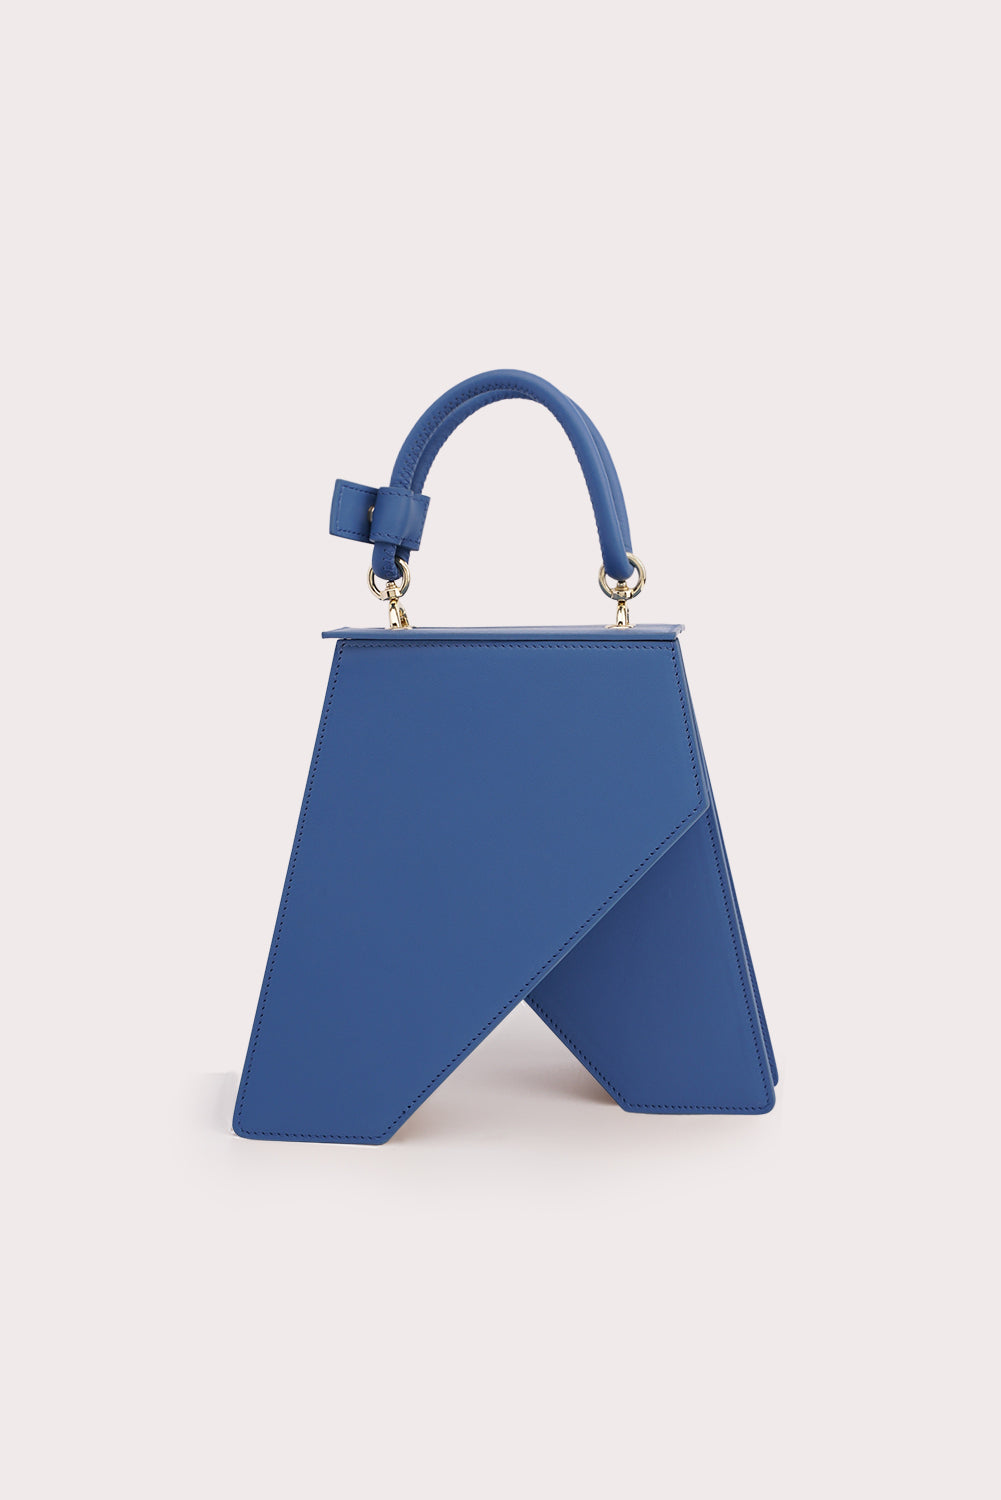 Trapezoid Tapo Bag in River Blue-1